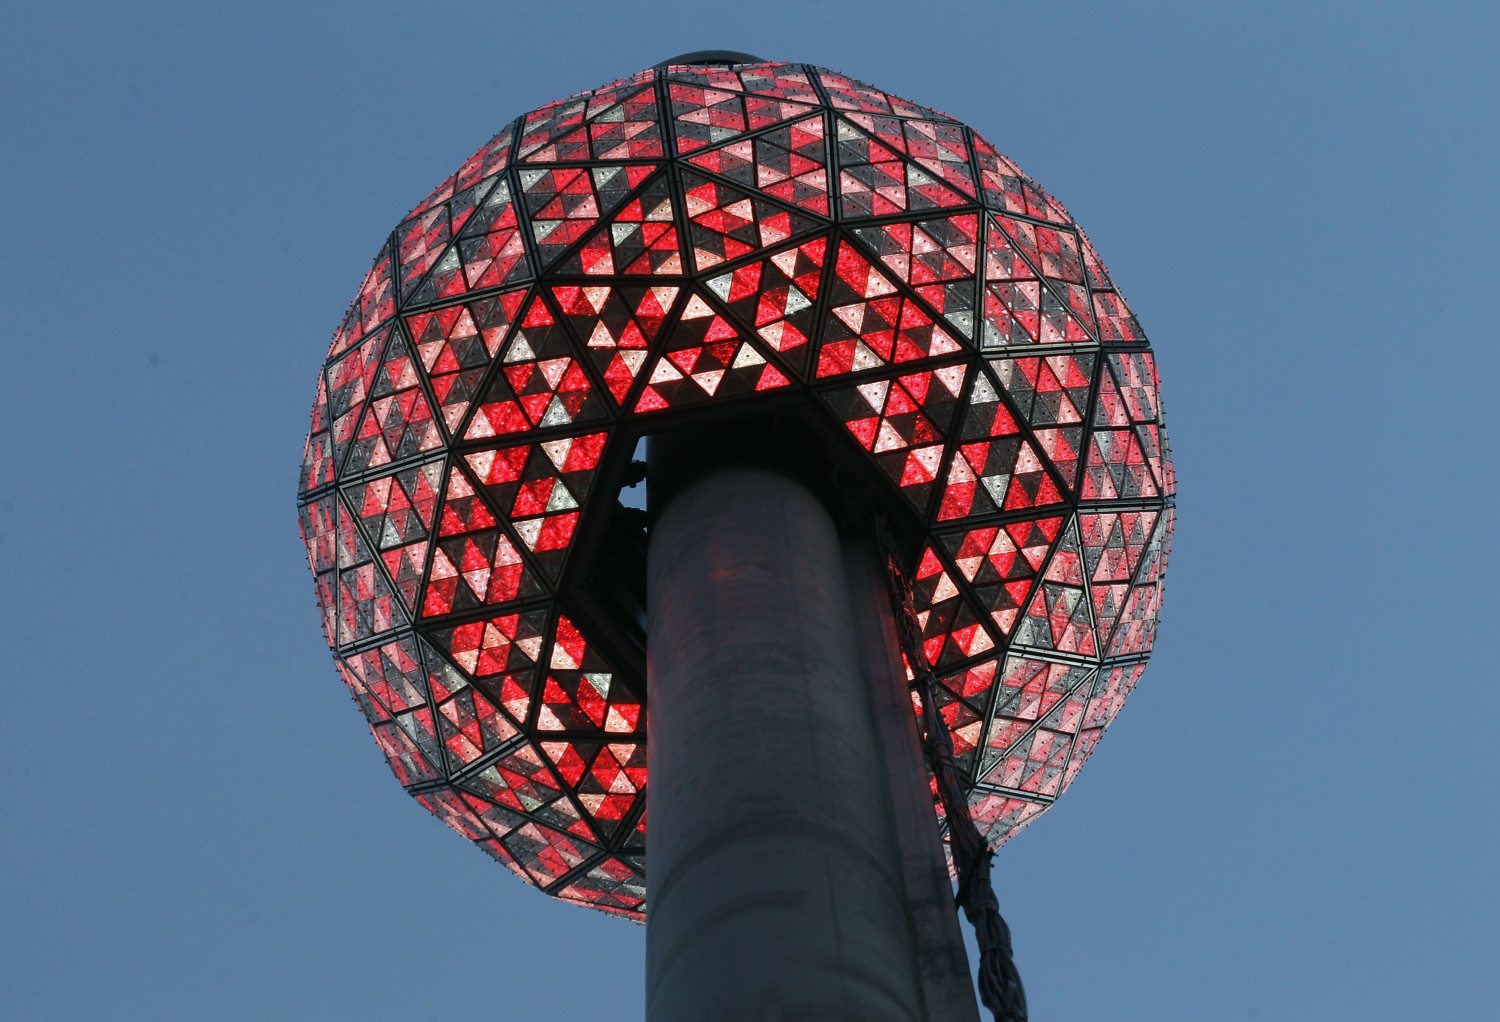 New York Tests Times Square Ball Ahead of New Year's Eve